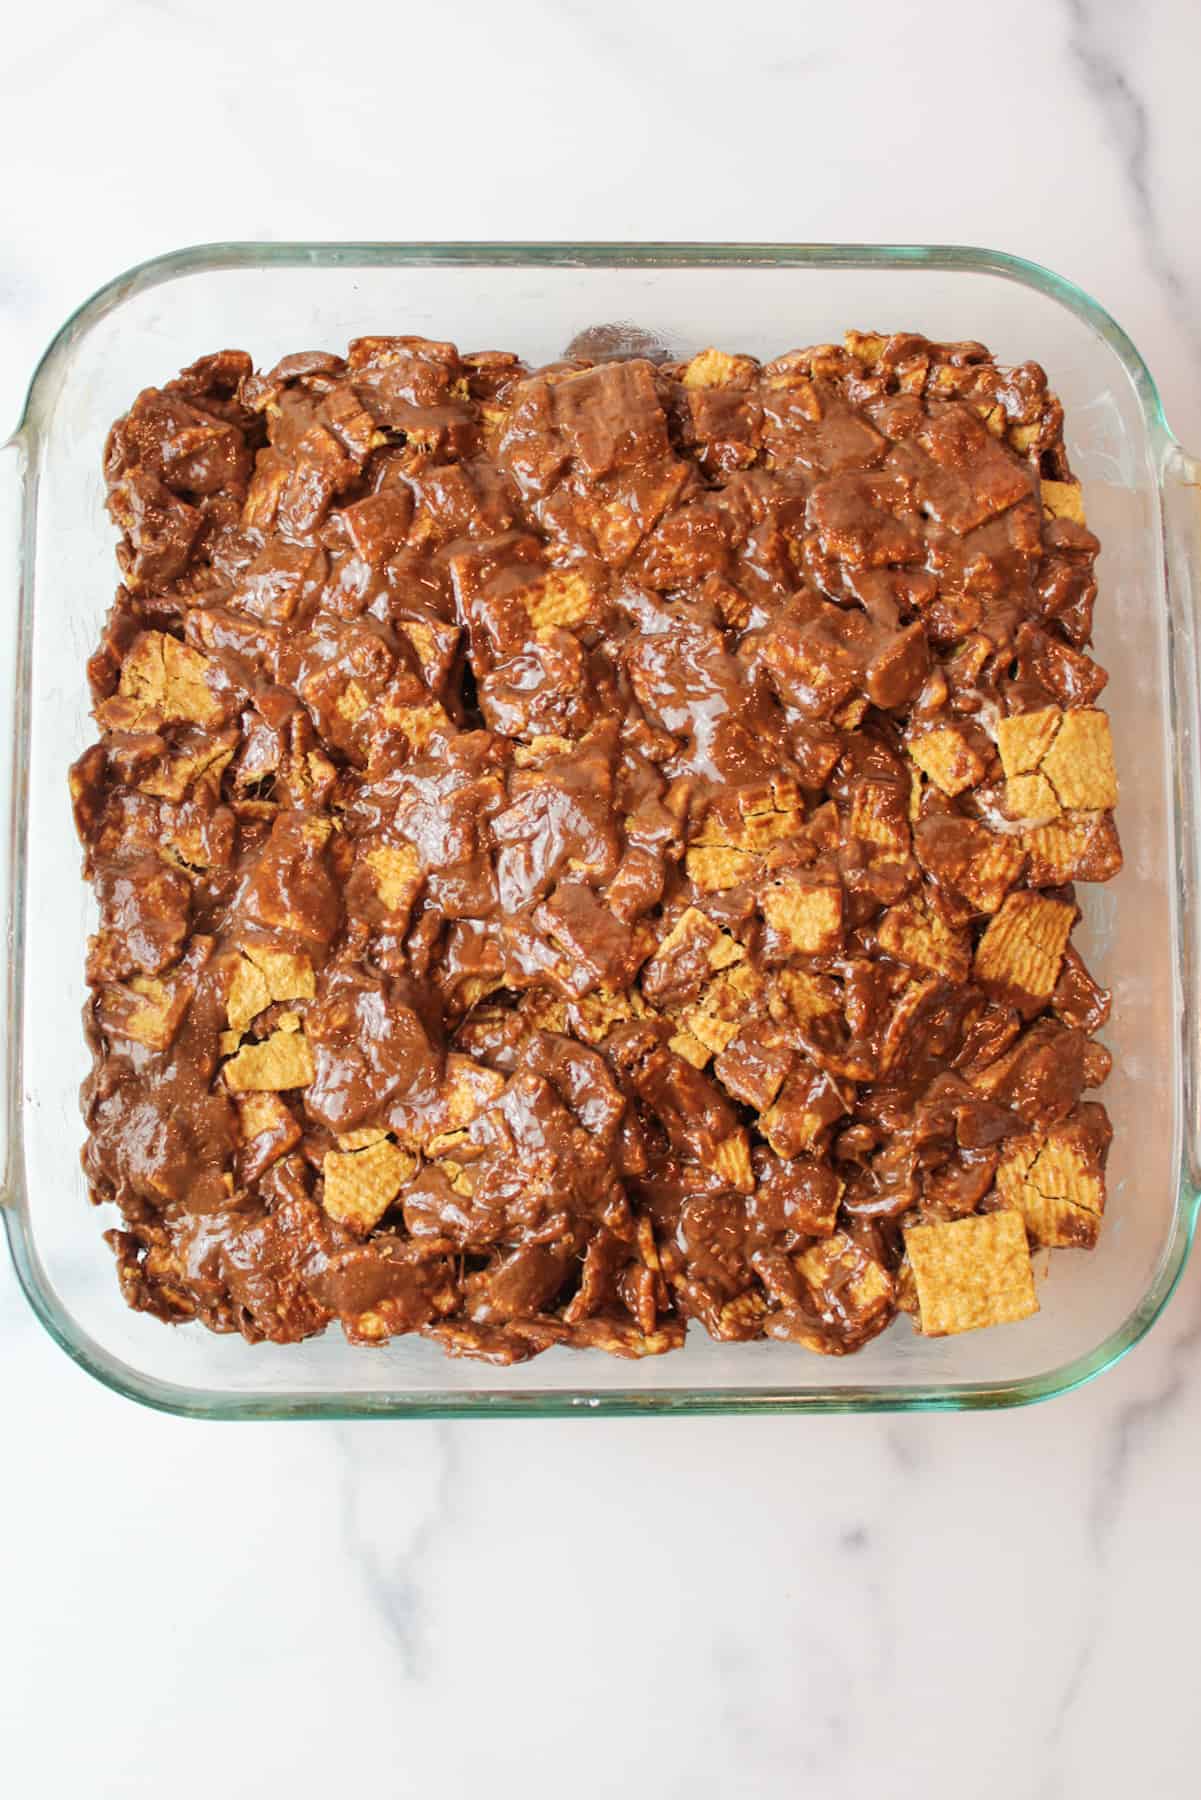 chocolate marshmallow cereal in a 8x8 baking dish